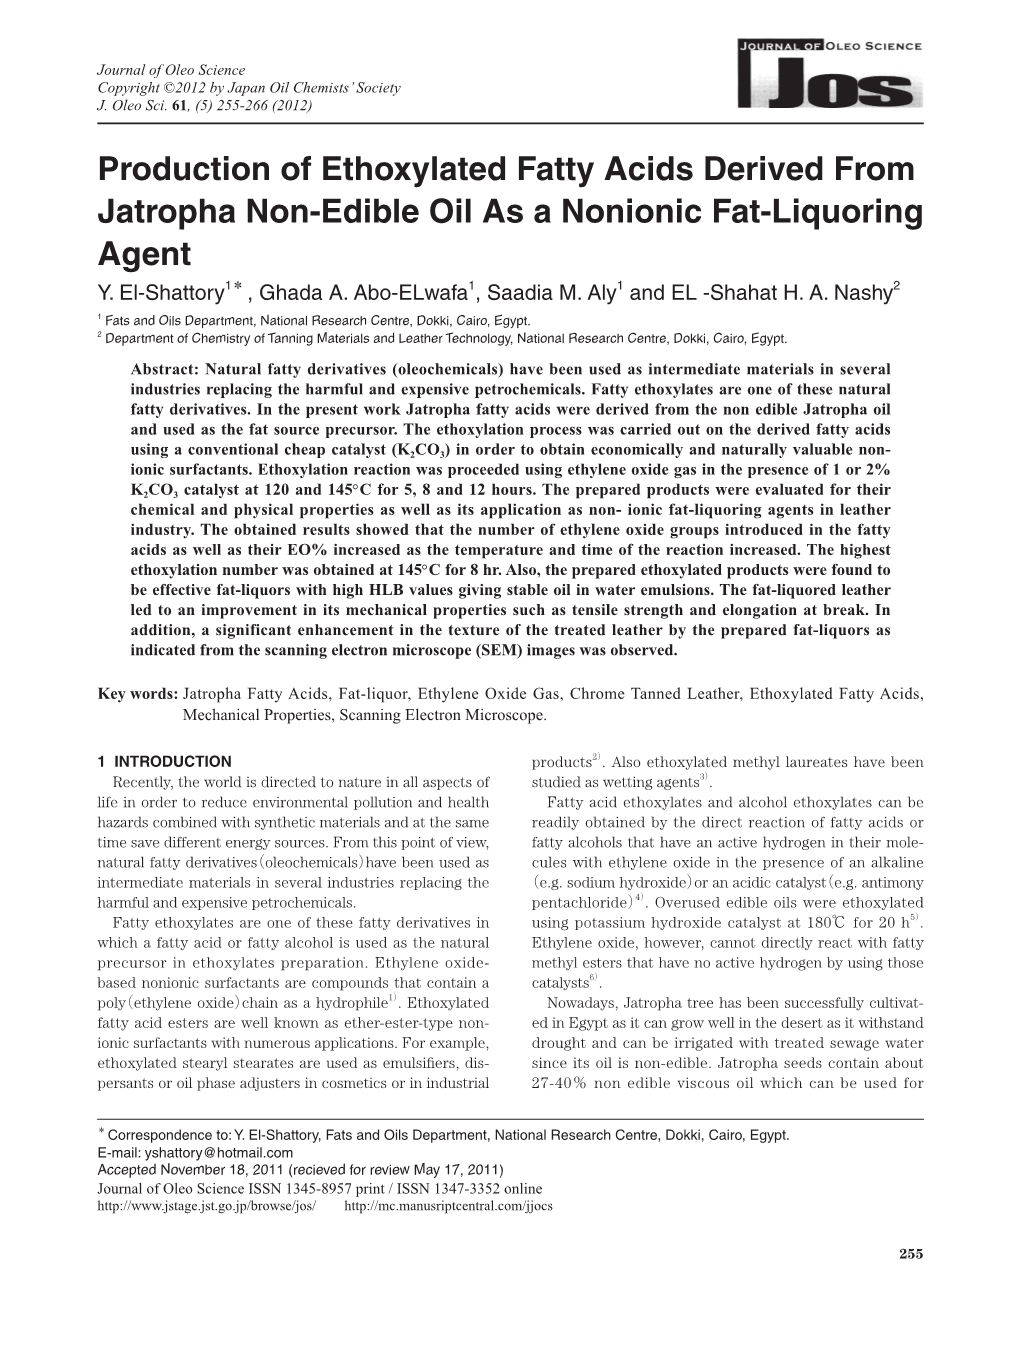 Production of Ethoxylated Fatty Acids Derived from Jatropha Non-Edible Oil As a Nonionic Fat-Liquoring Agent Y